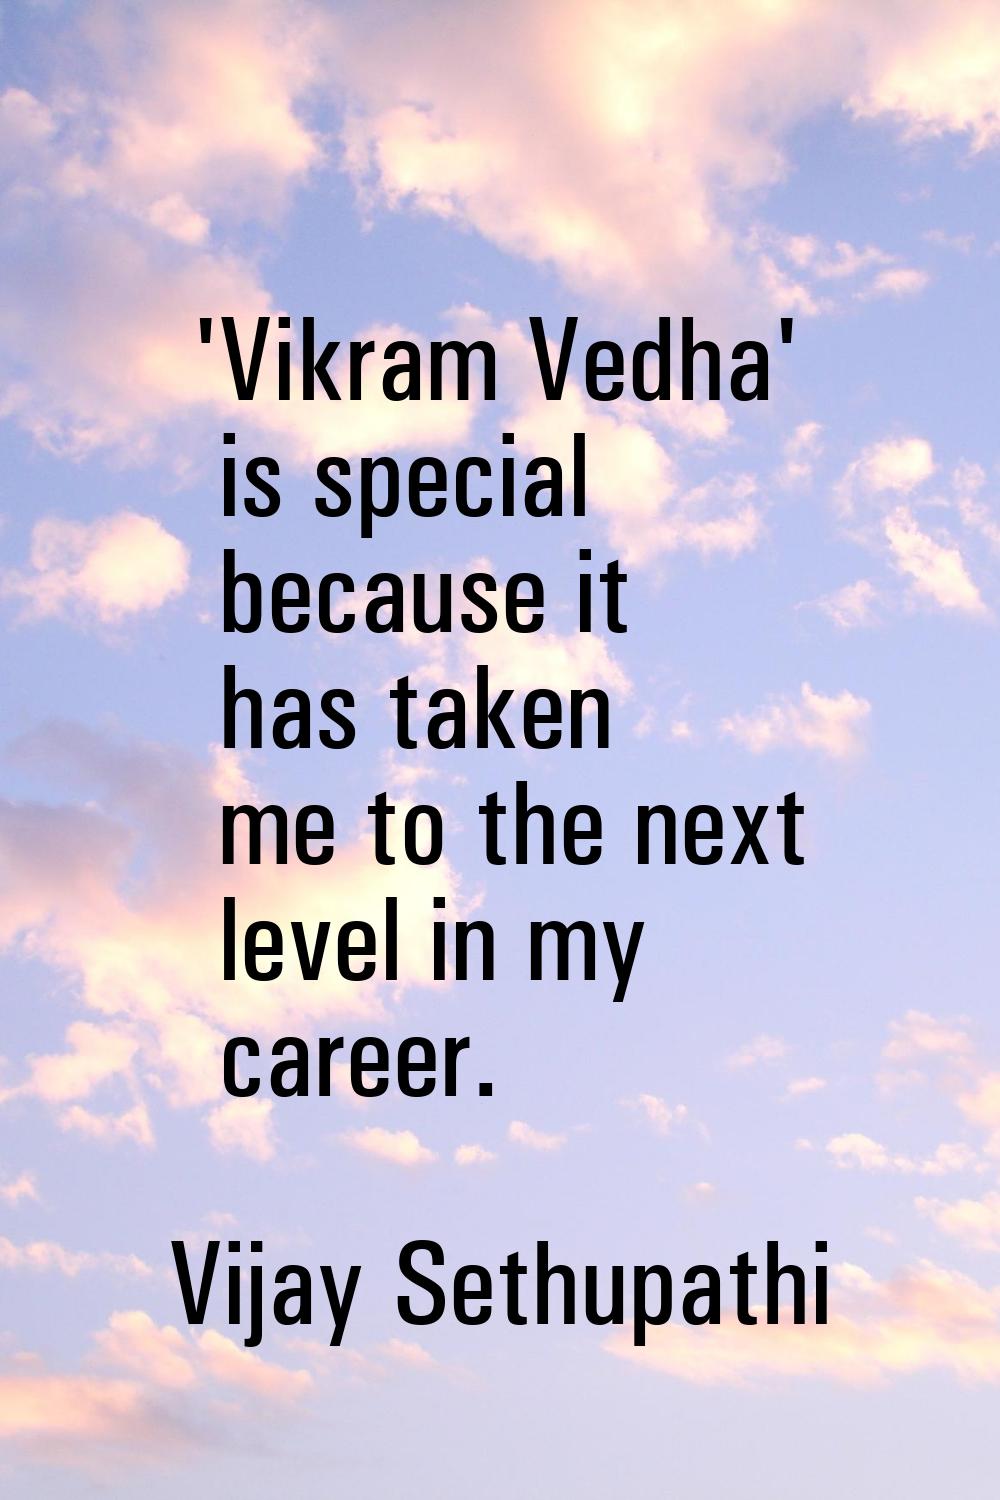 'Vikram Vedha' is special because it has taken me to the next level in my career.